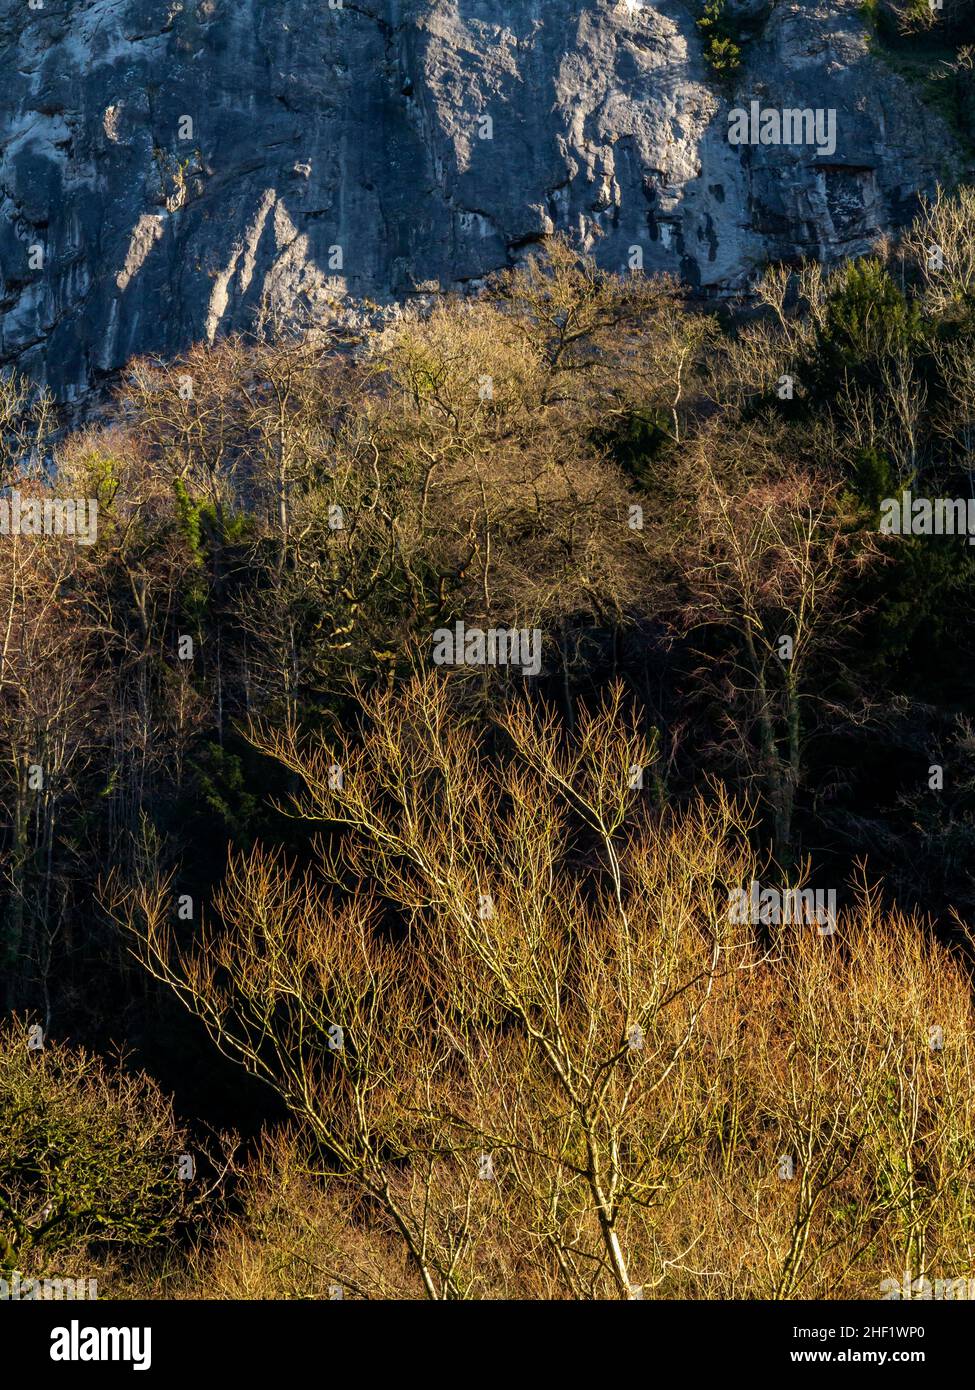 The limestone cliffs with trees in winter colour at High Tor in Matlock Bath in the Derbyshire Peak District England UK Stock Photo